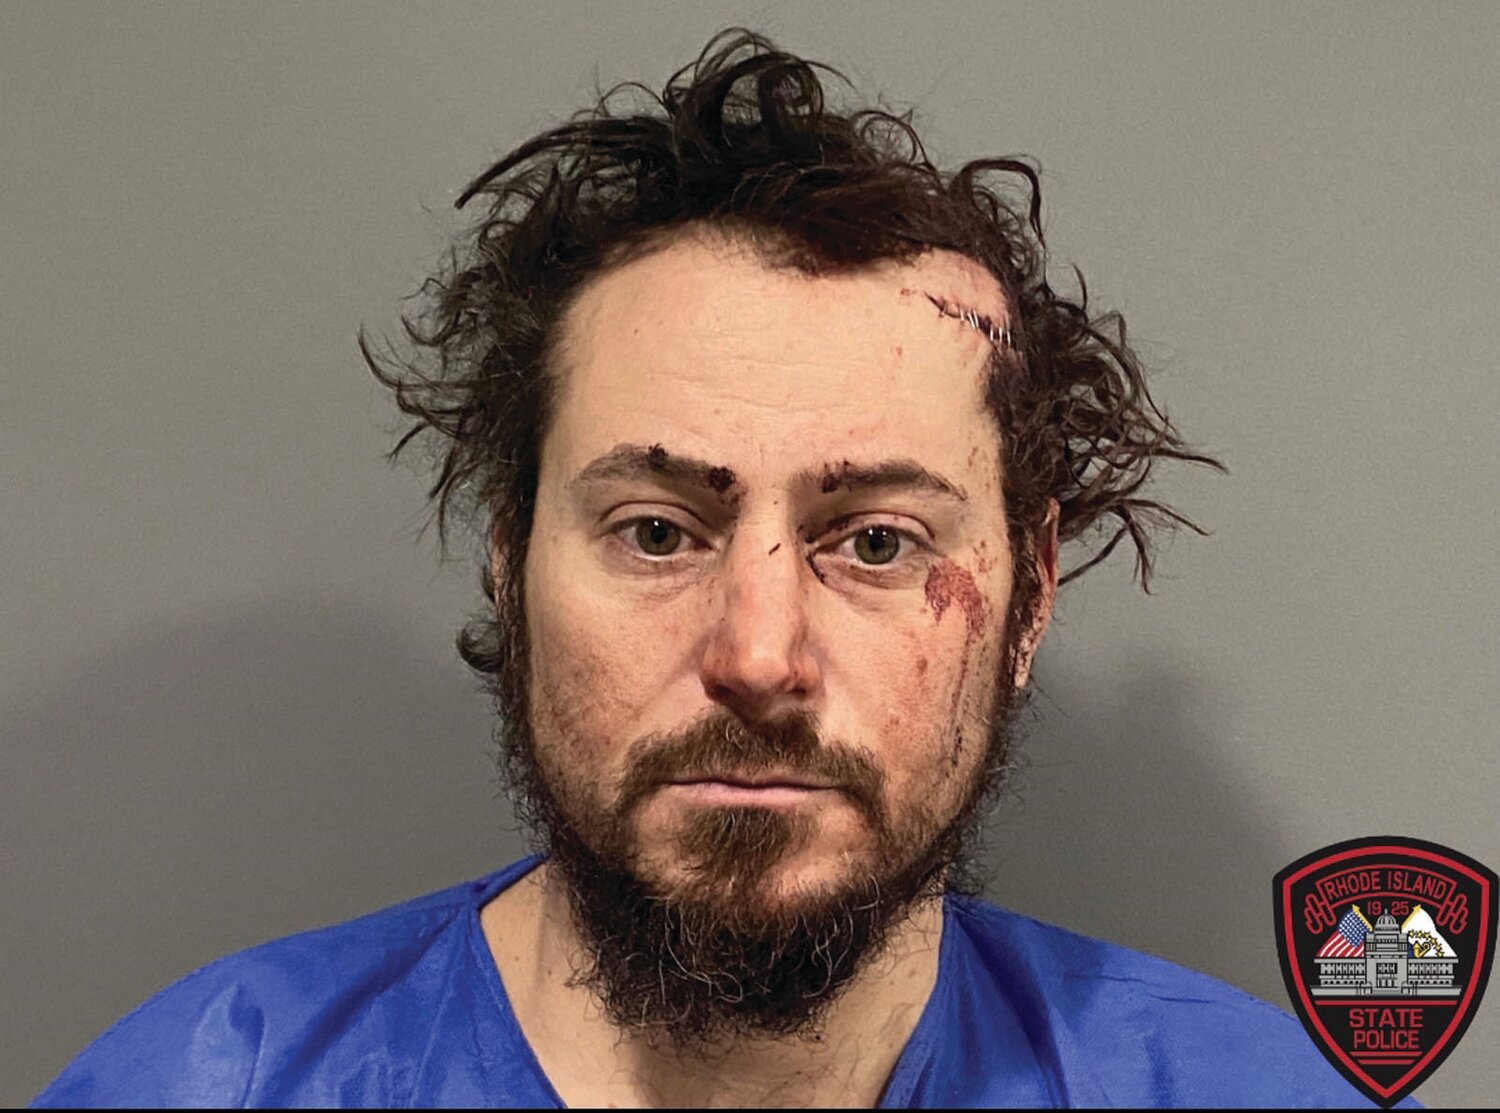 CHARGED: Joseph L. Giudici, 40, of 7 Canonchet Trail, Johnston, has been arrested and charged with Driving Under the Influence after he struck two marked Rhode Island State Police cruisers on Saturday night, sending two Troopers to the hospital, according to police. RISP provided photos from the Providence crash scene.